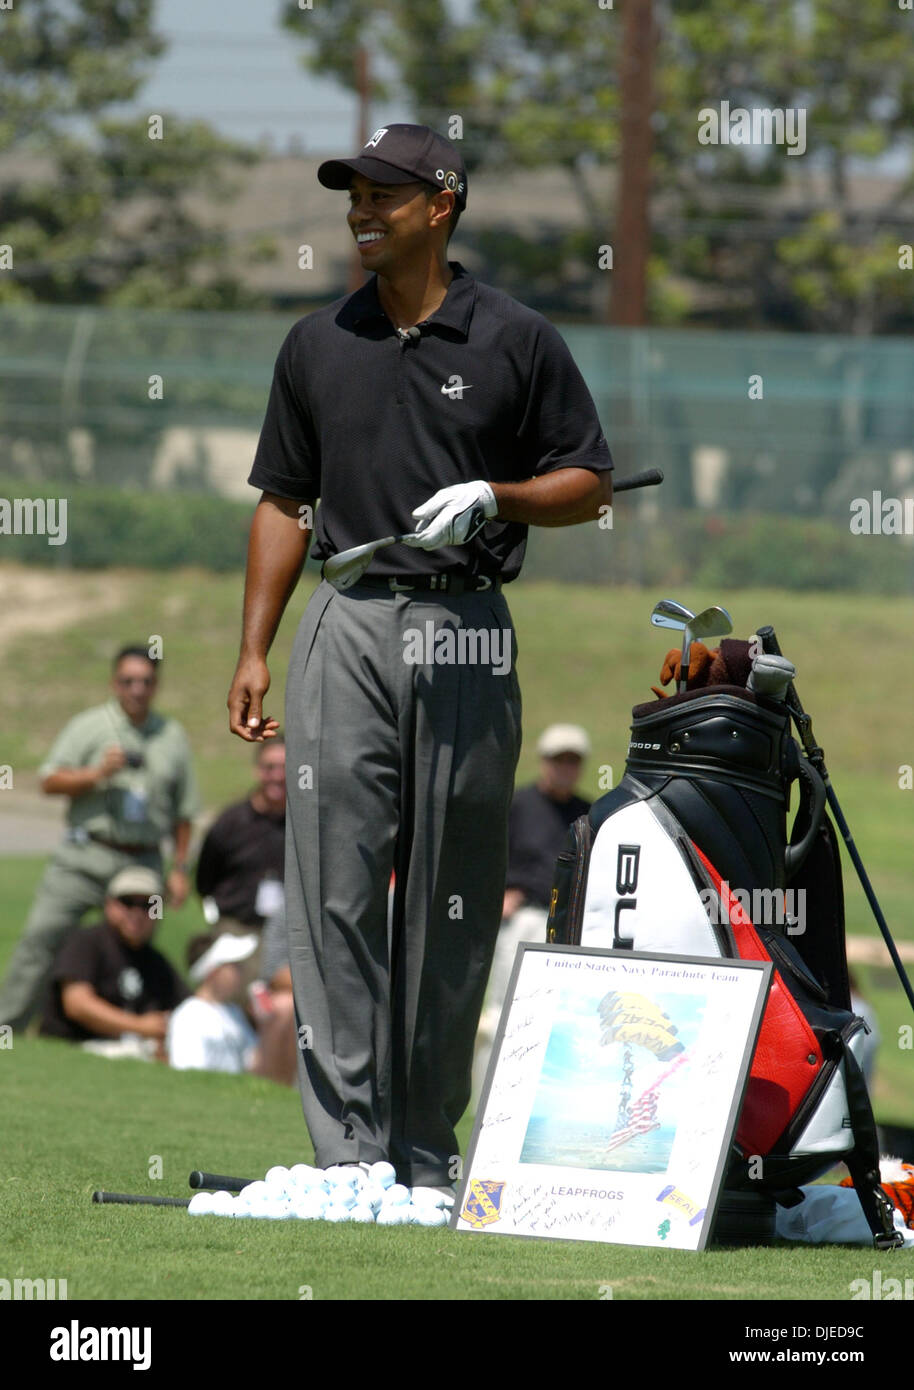 Aug 28, 2004; Anaheim, CA, USA; Golfer TIGER WOODS hold a press conference and golf clinic to announce the opening of The Tiger Woods Learning Center. The location of the learning center is a few miles away from the city of Cypress, California where Tiger was raised. Stock Photo